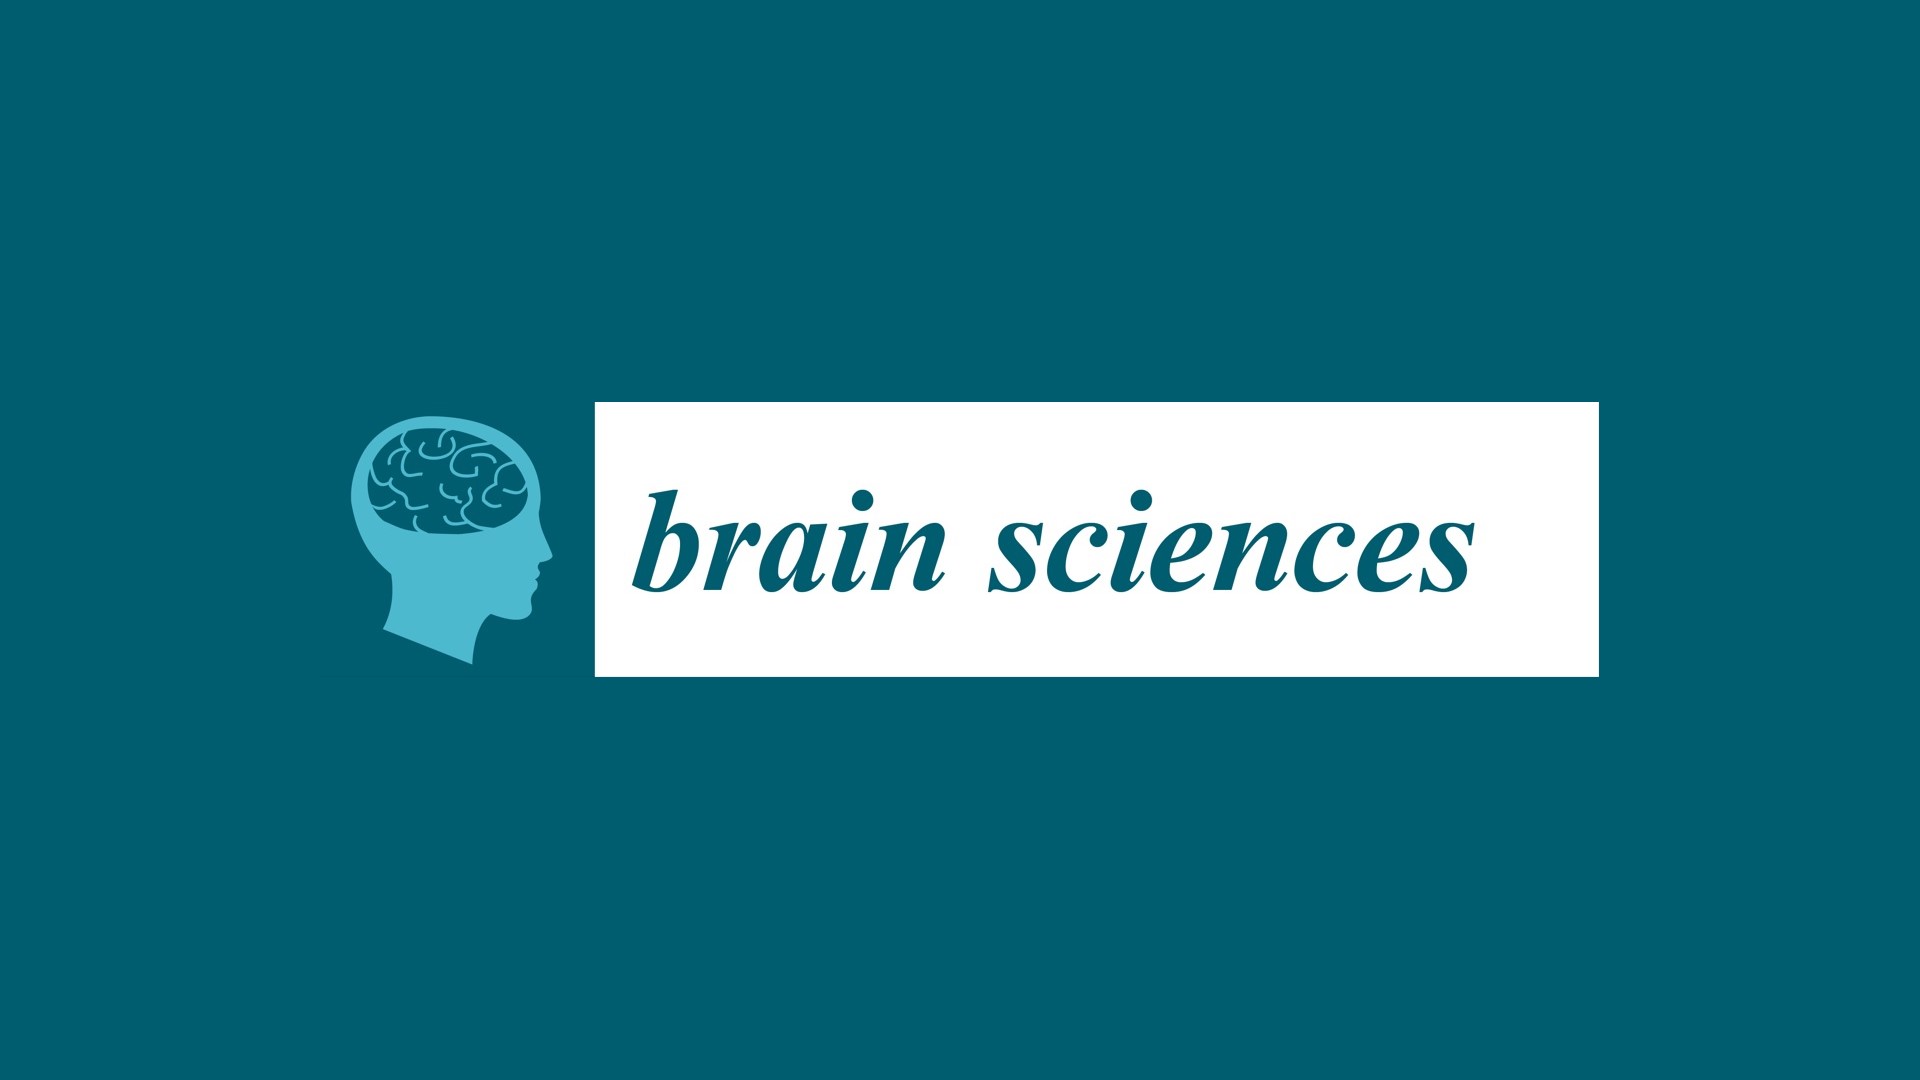 Brain Sciences Special Issue Is Now Open For Manuscript Submissions!